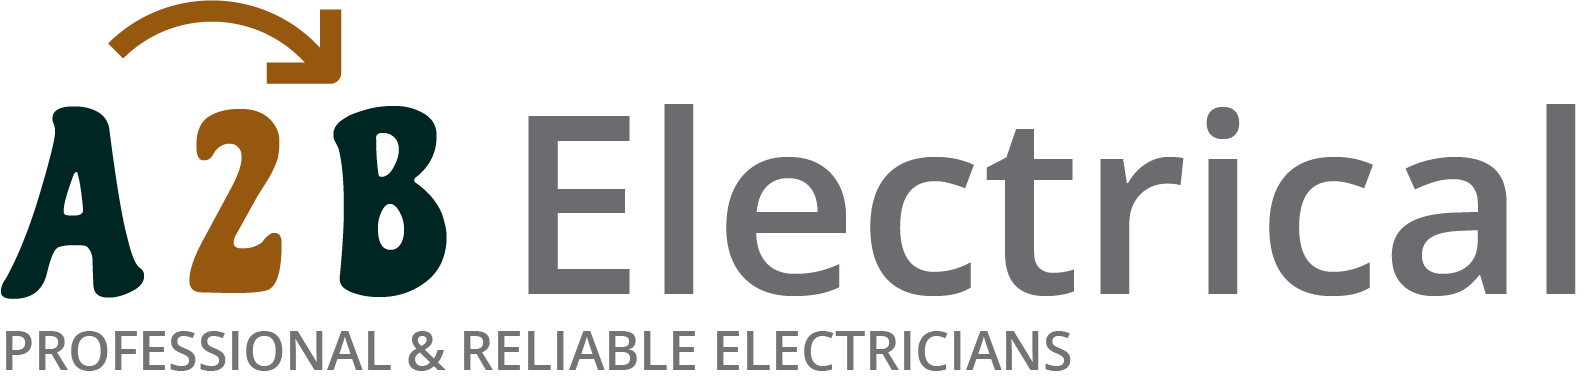 If you have electrical wiring problems in Shepway, we can provide an electrician to have a look for you. 